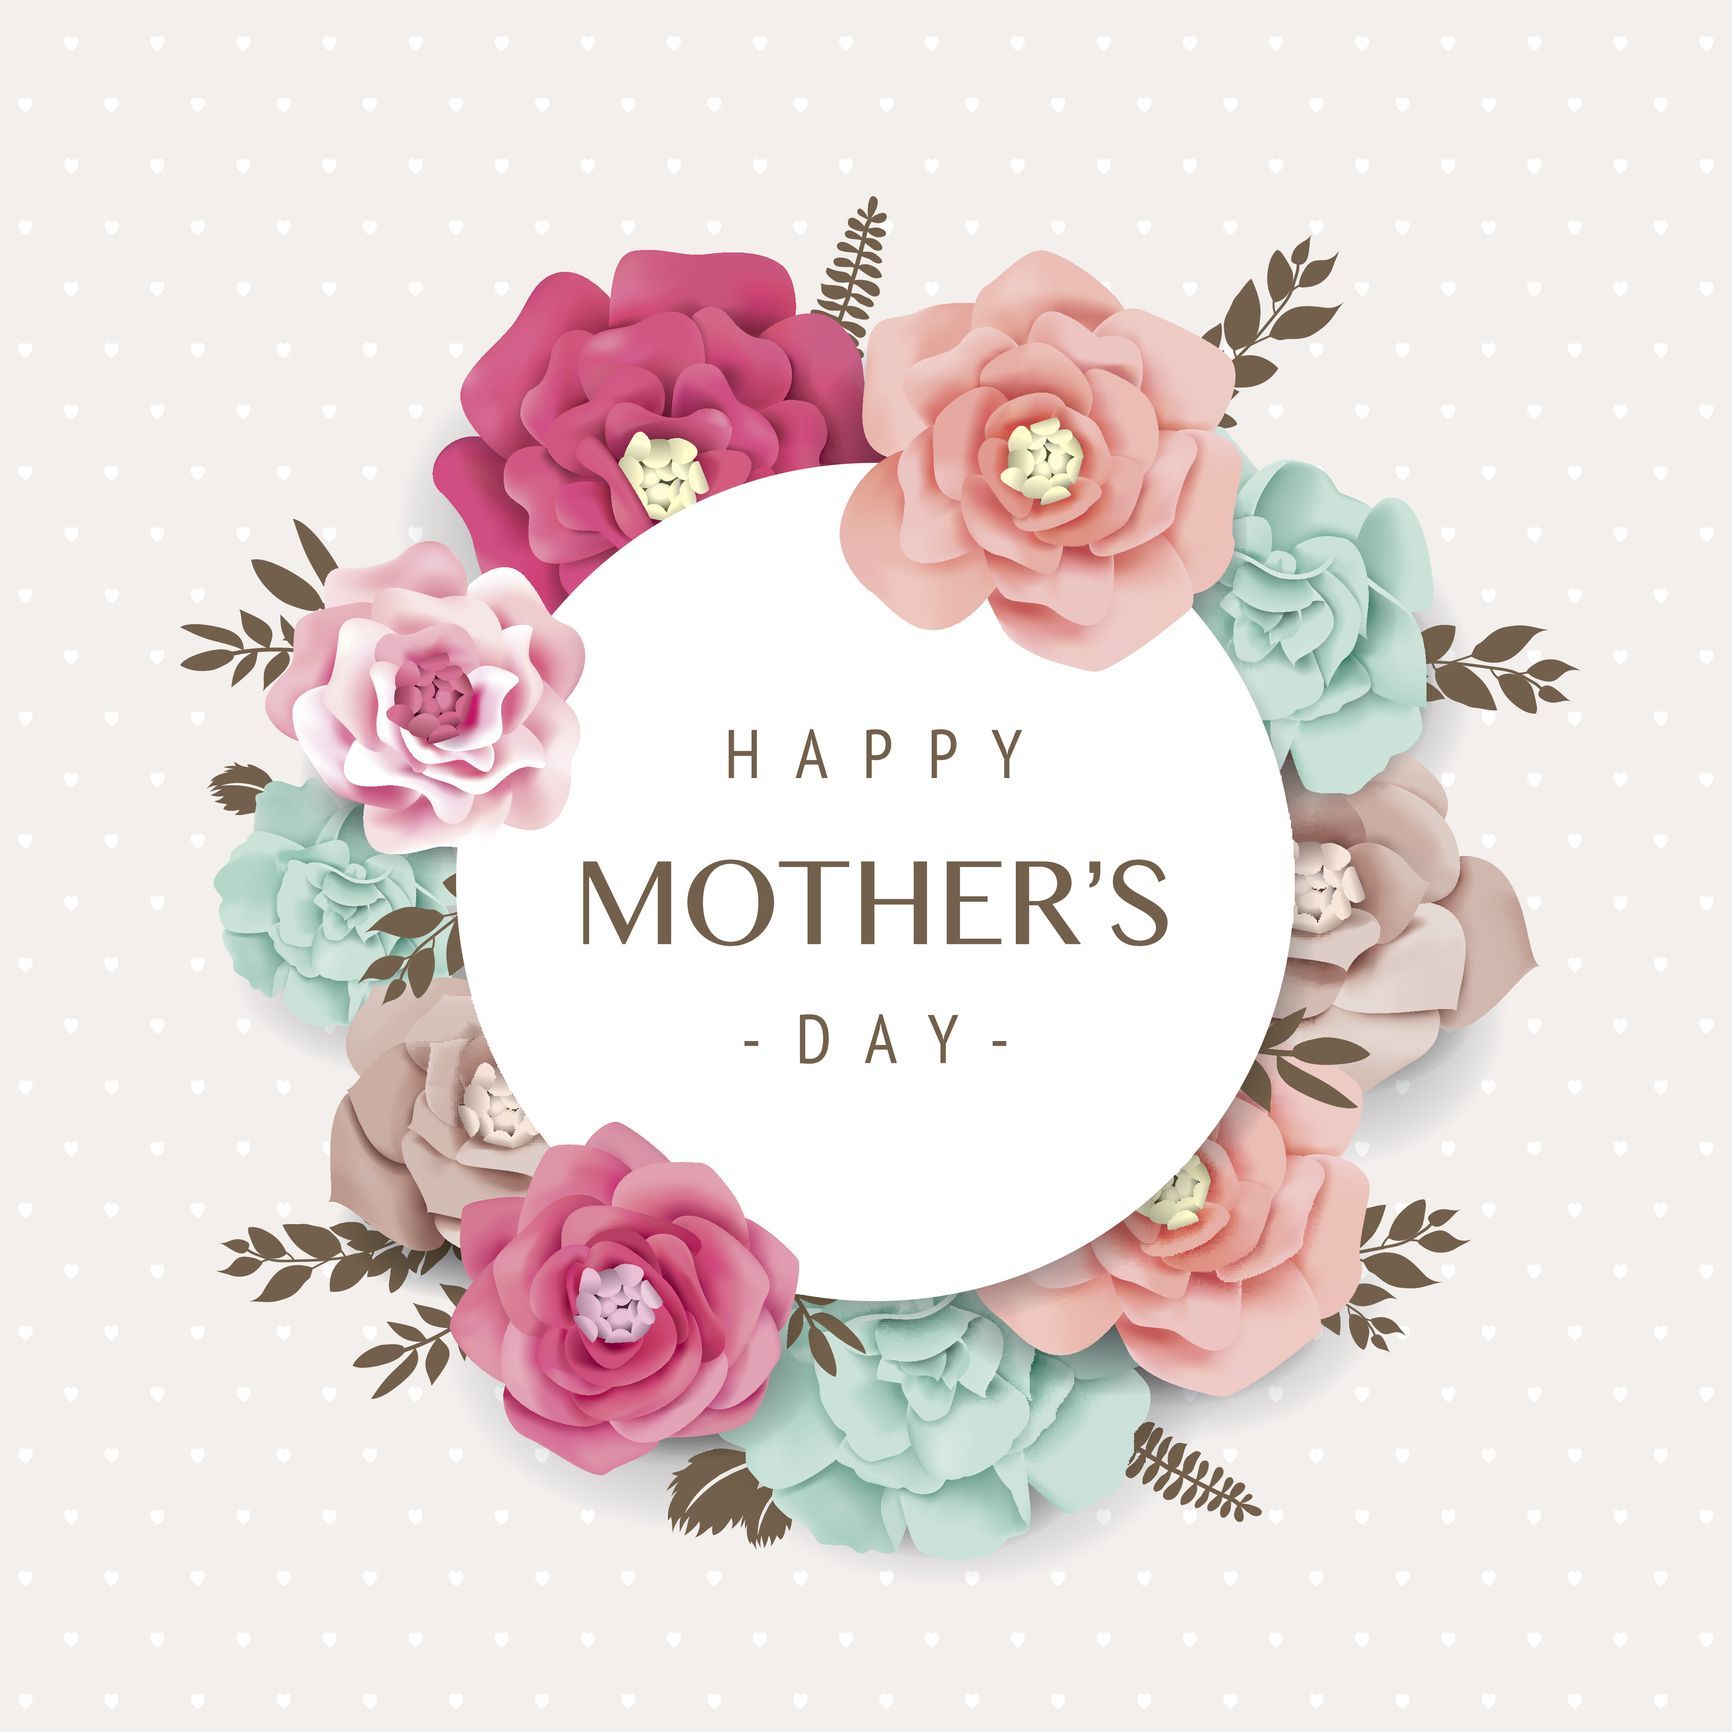 Homepage. Happy mothers day wishes, Happy mother's day card, Happy mothers day image